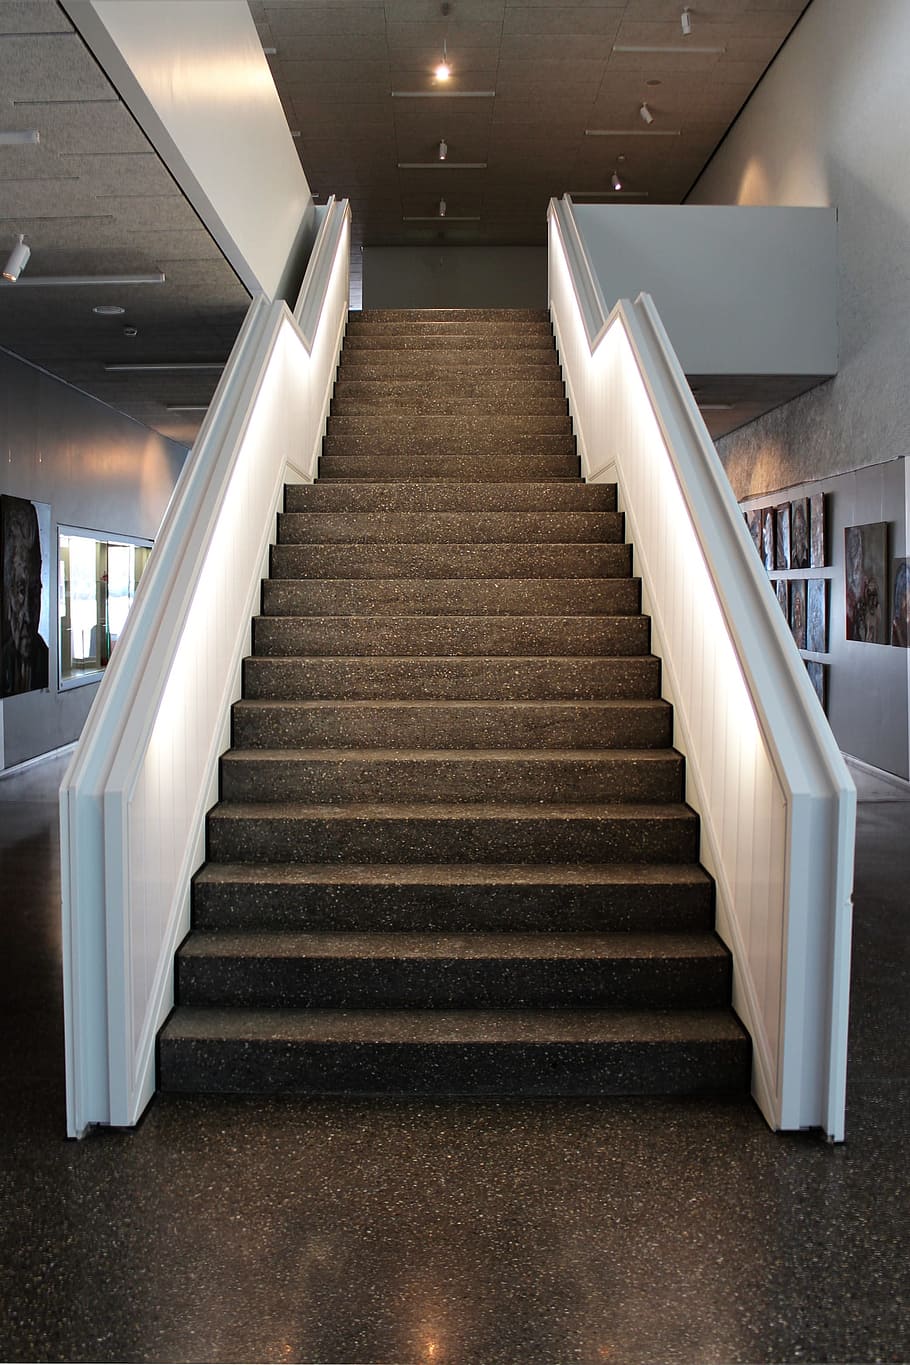 brown concrete stairs, Architecture, Stairs, gradually, staircase, steps, steps and staircases, indoors, modern, railing